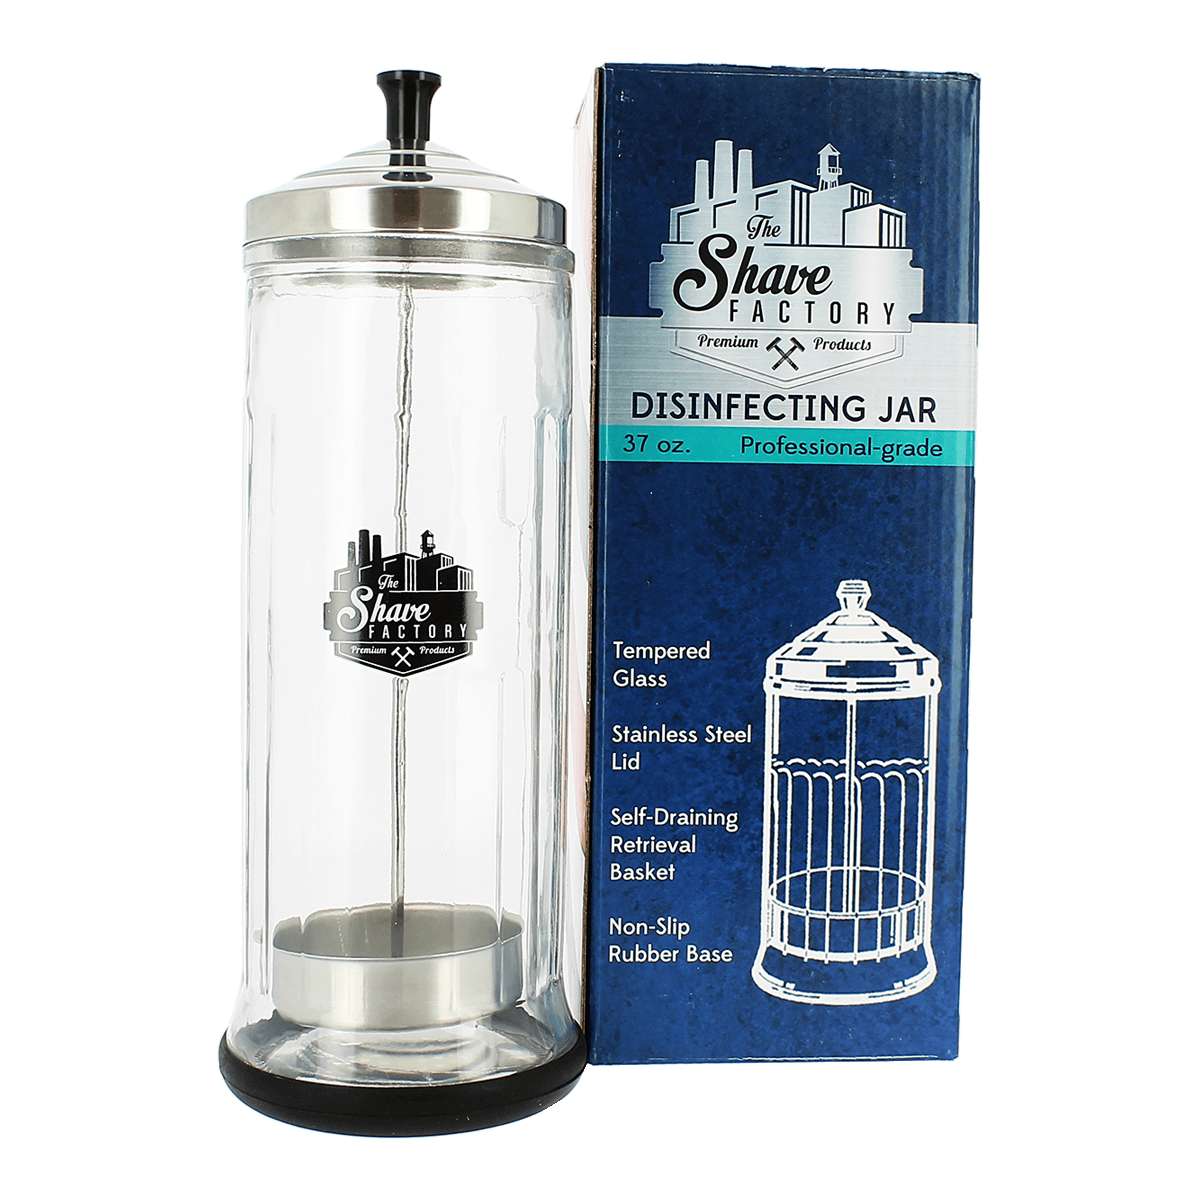 The Shave Factory Disinfecting Jar 37 oz